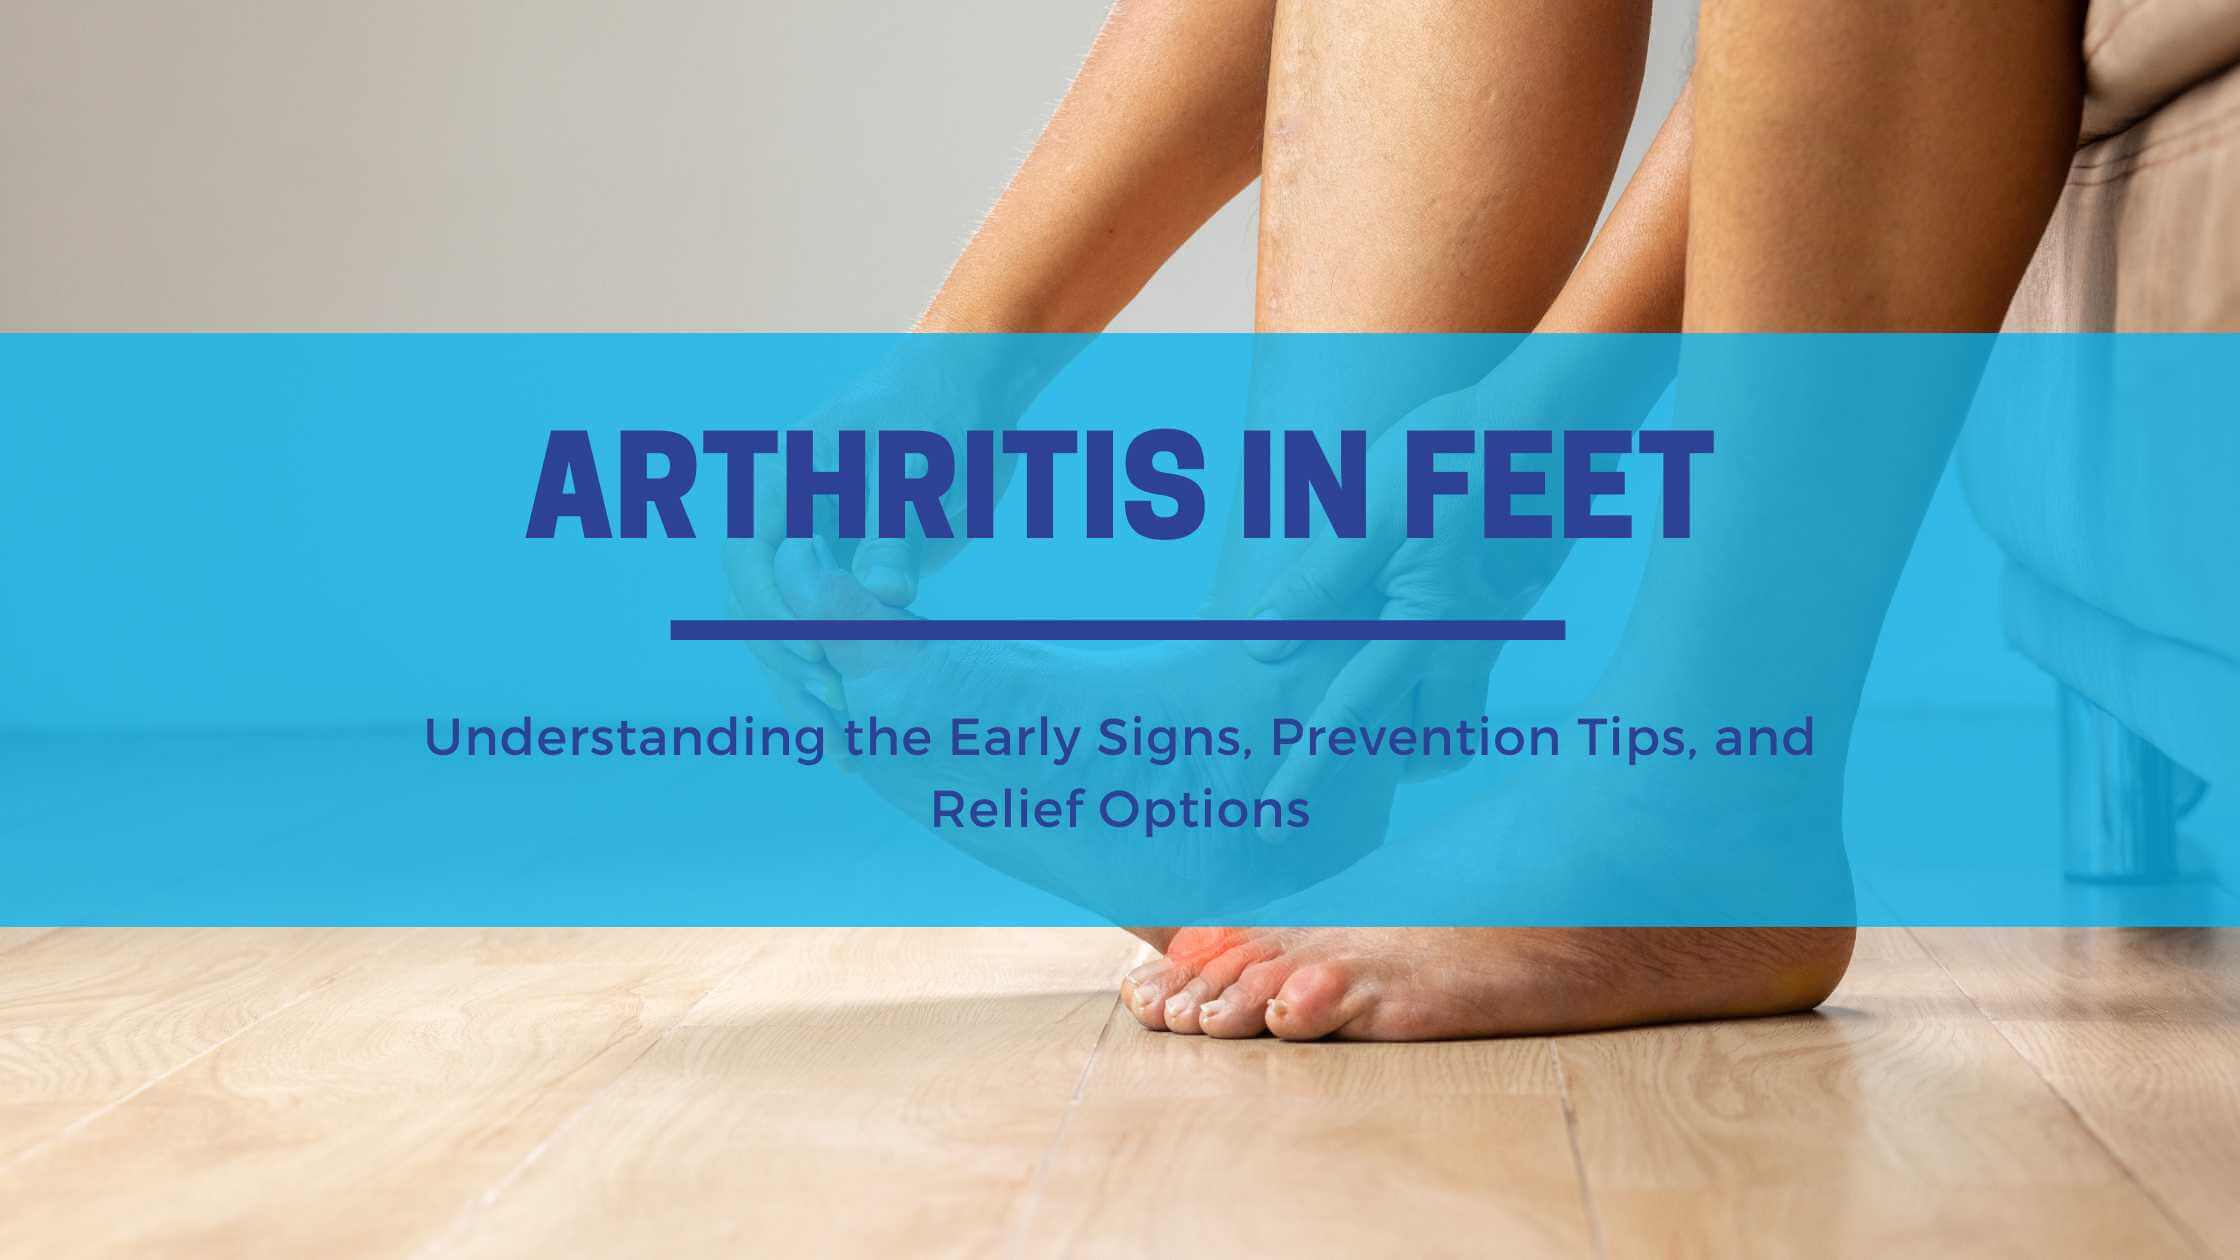 Arthritis in Feet: Understanding the Early Signs, Prevention Tips, and Relief Options